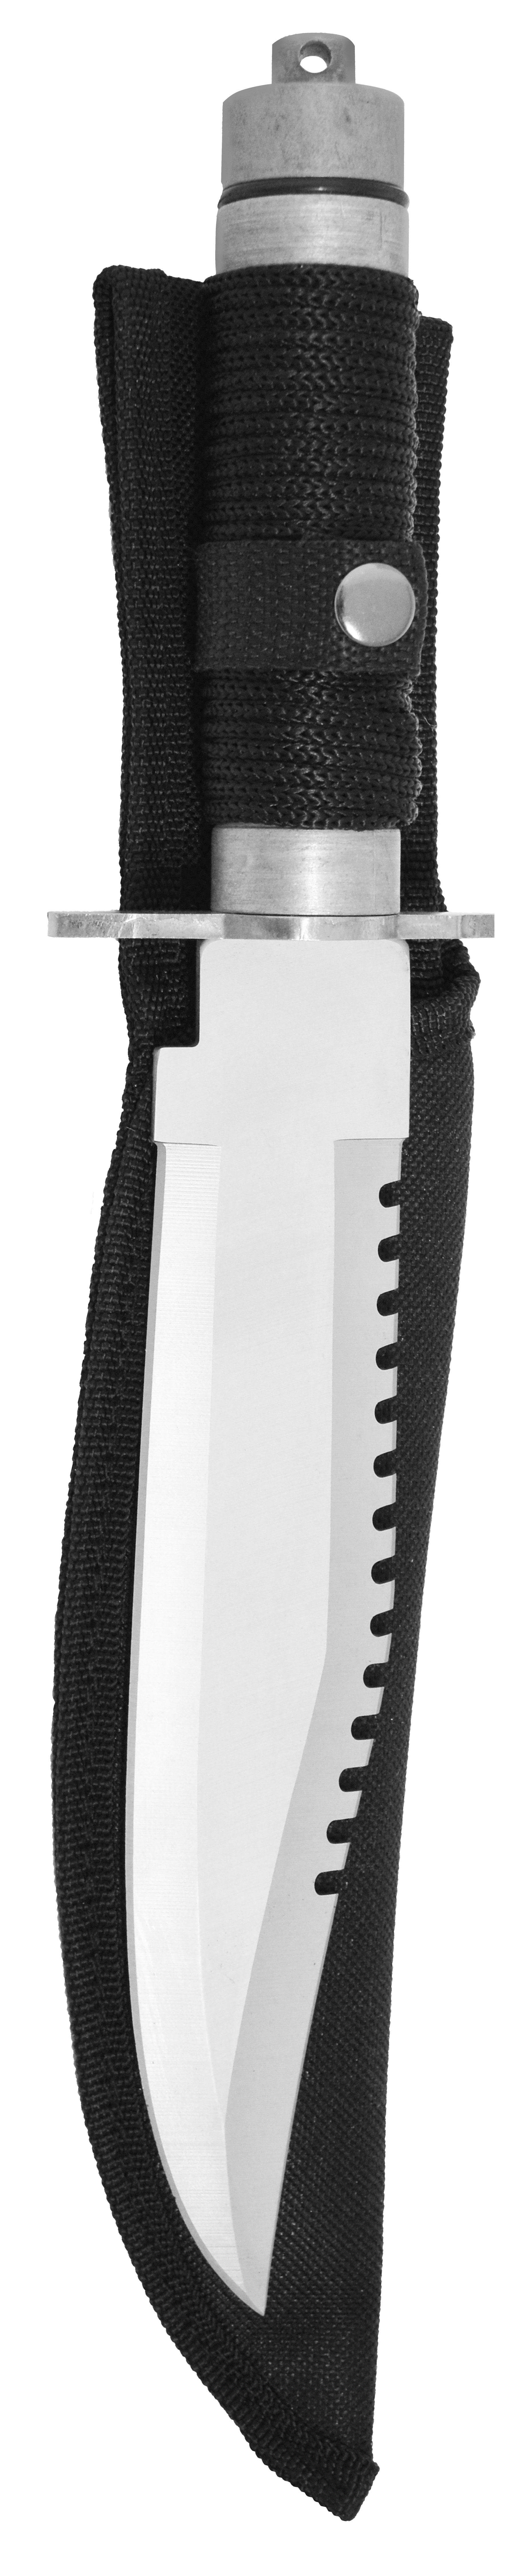 Zenport Survival Knife 14036 Hunting Survival Knife, 8-Inch Stainless Steel Blade, Paracord Grip, Compass, Nylon Sheath